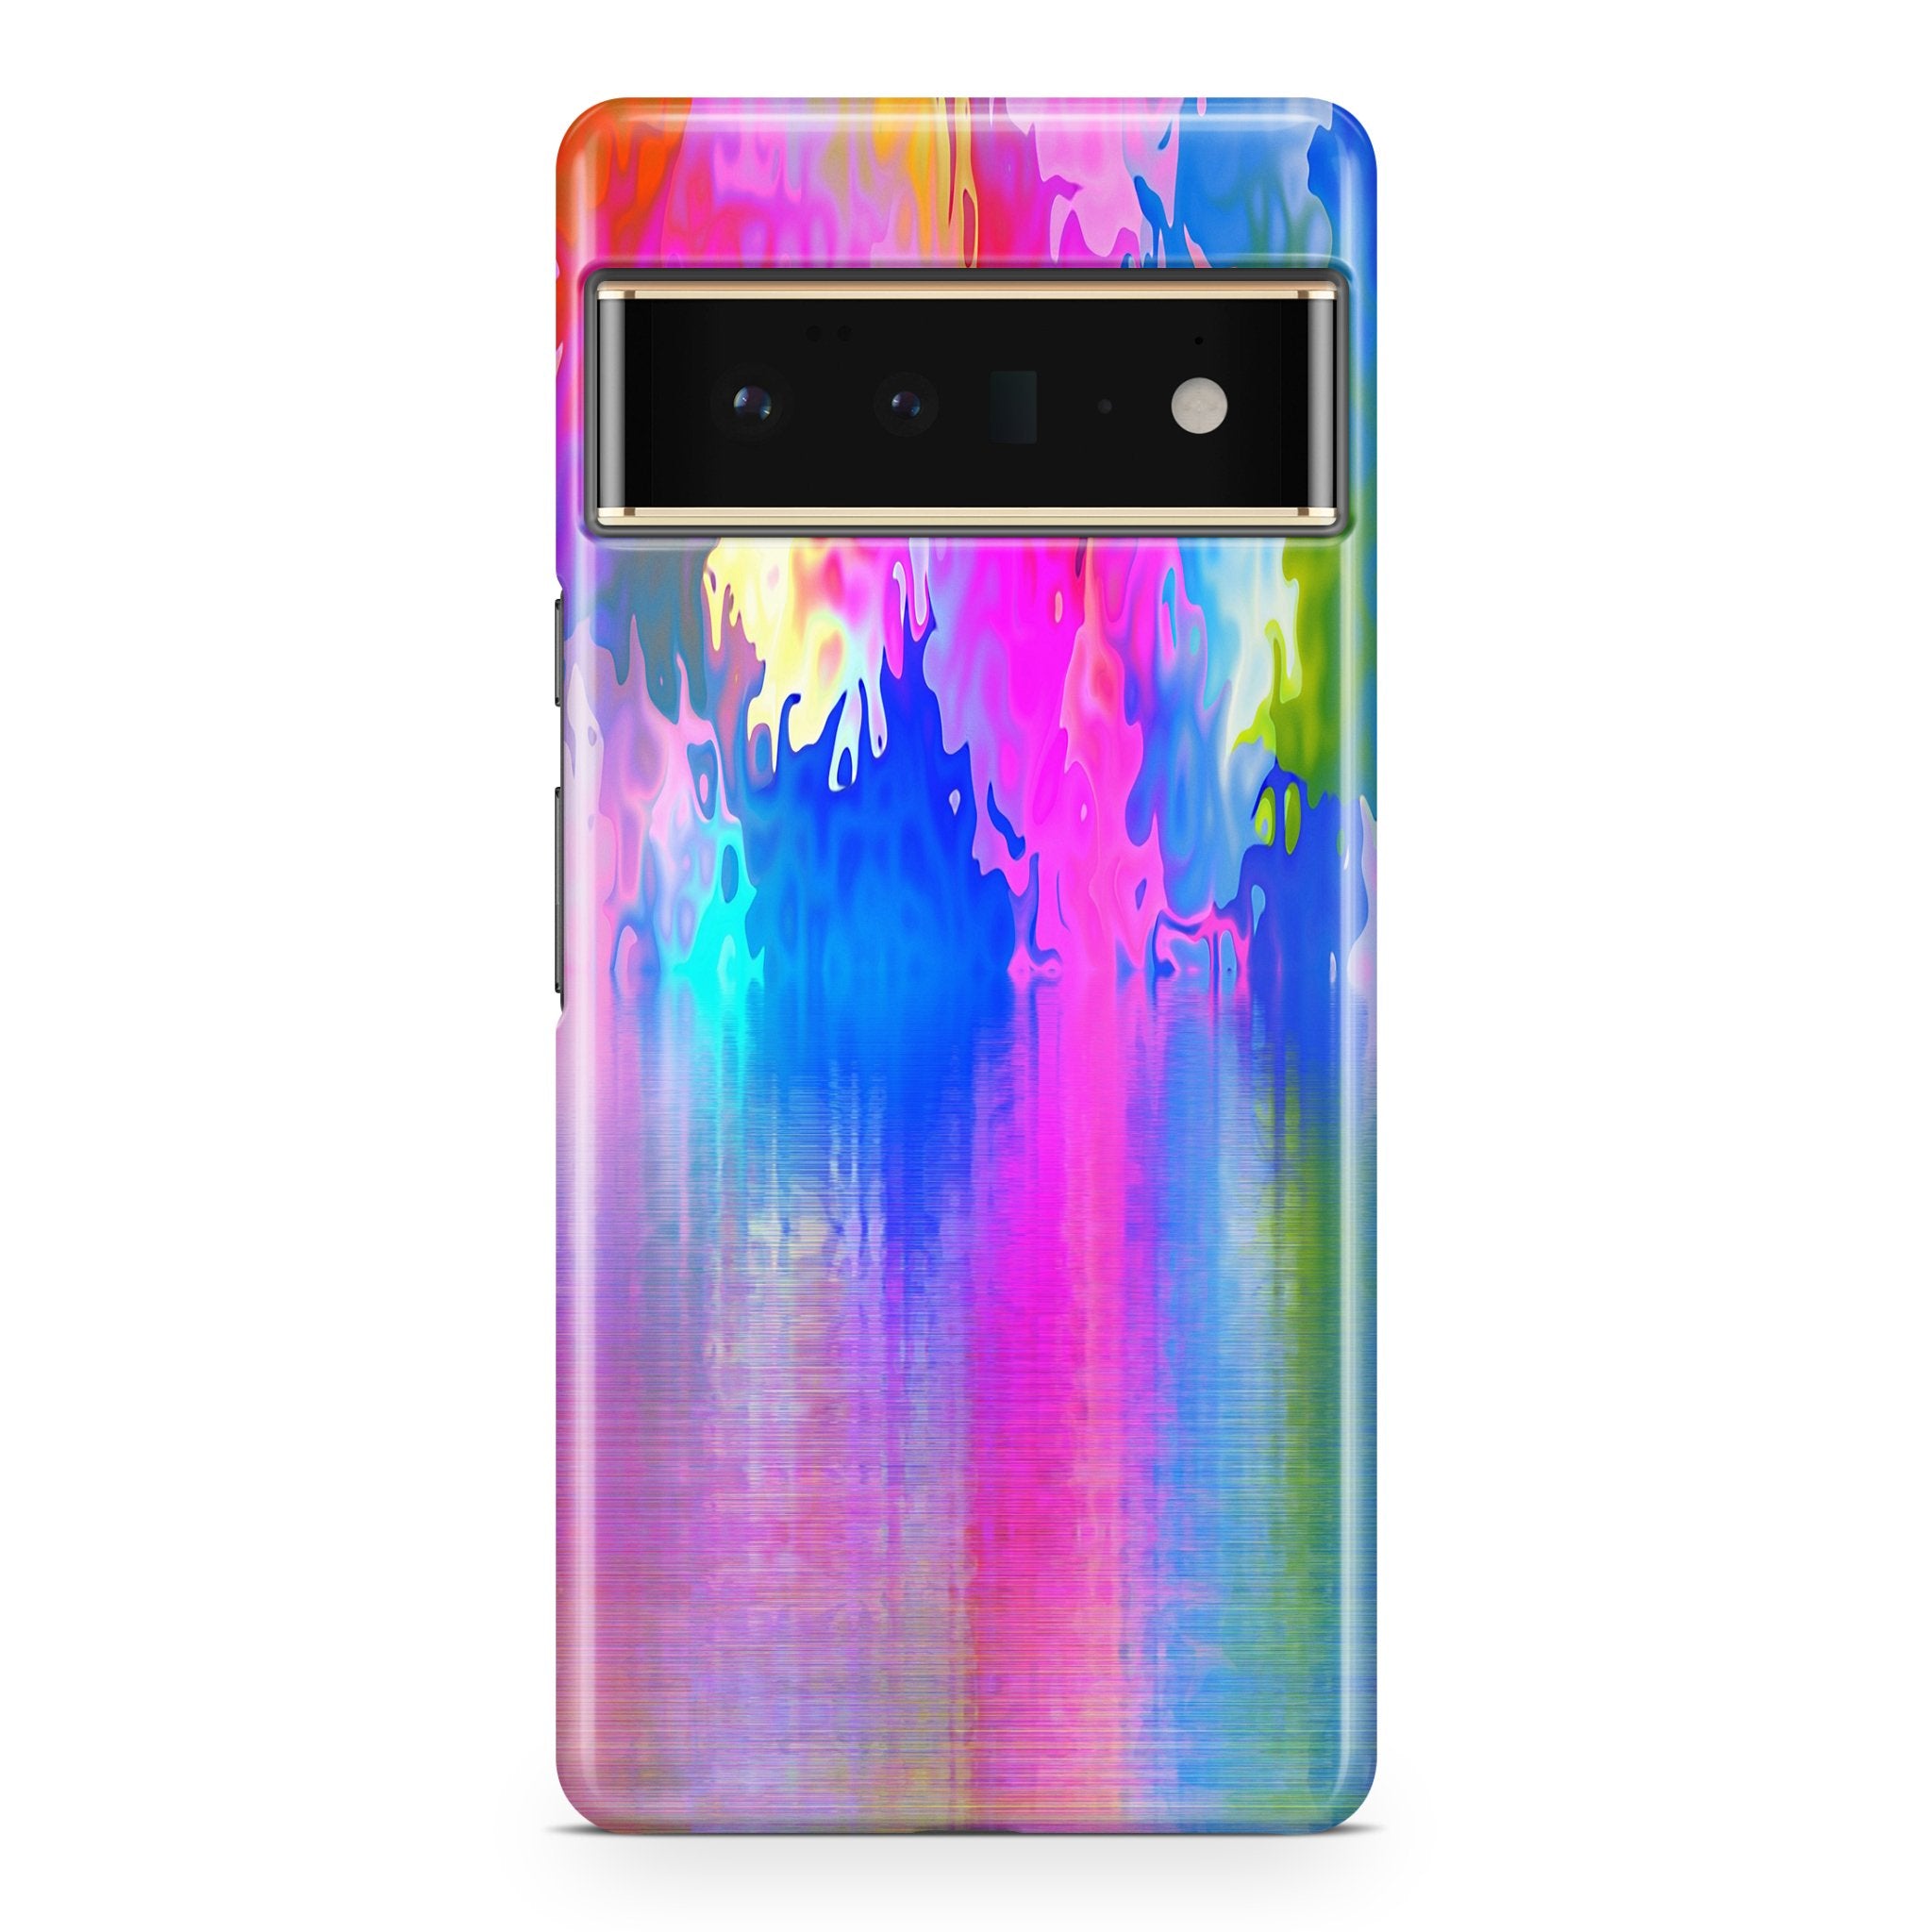 ColorCloud - Google phone case designs by CaseSwagger